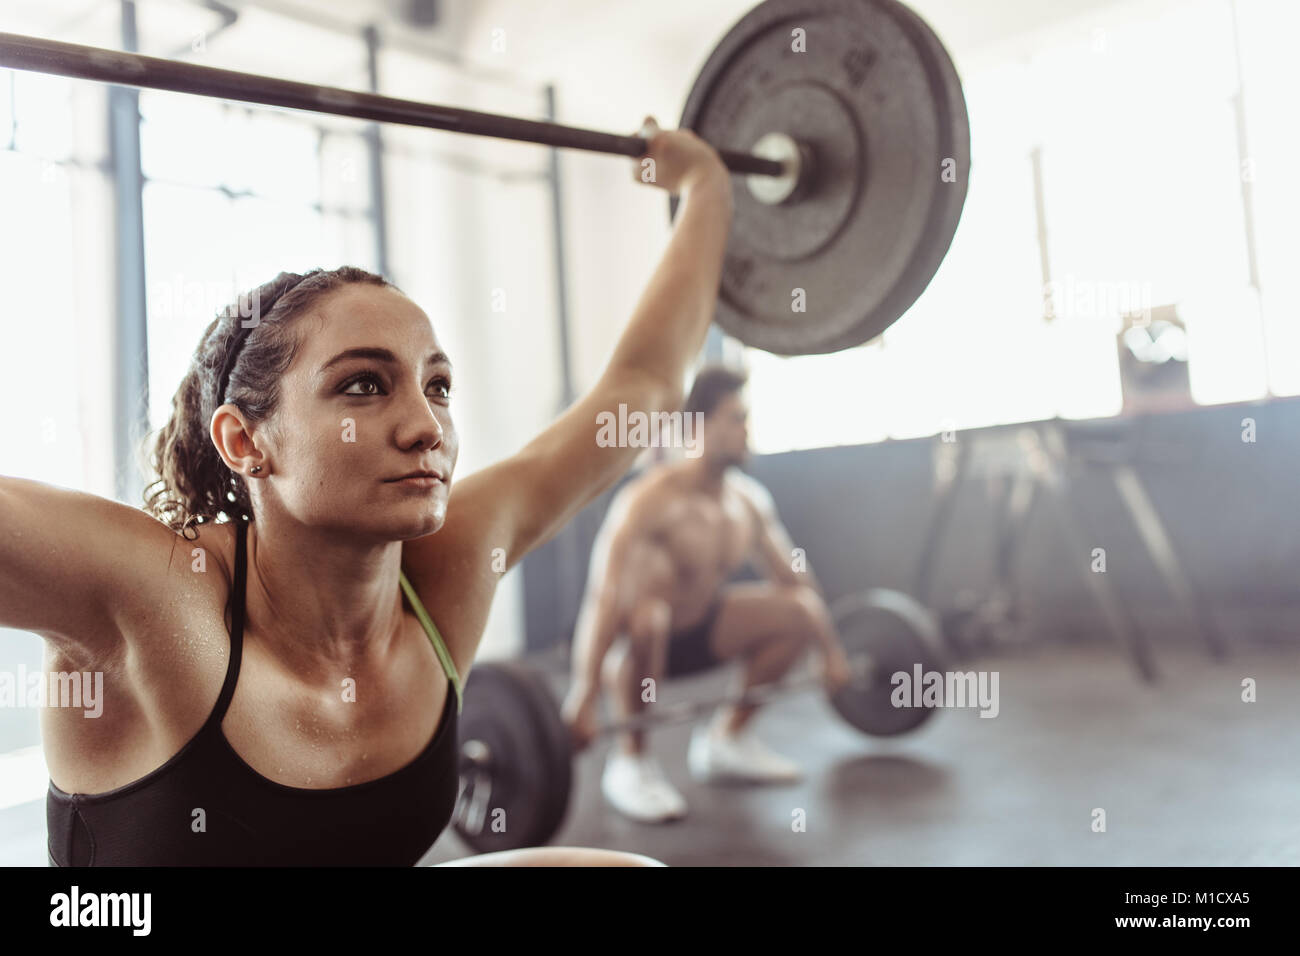 Tough young woman exercising with barbell. Determined female athlete lifting heavy weights at cross training gym. Stock Photo